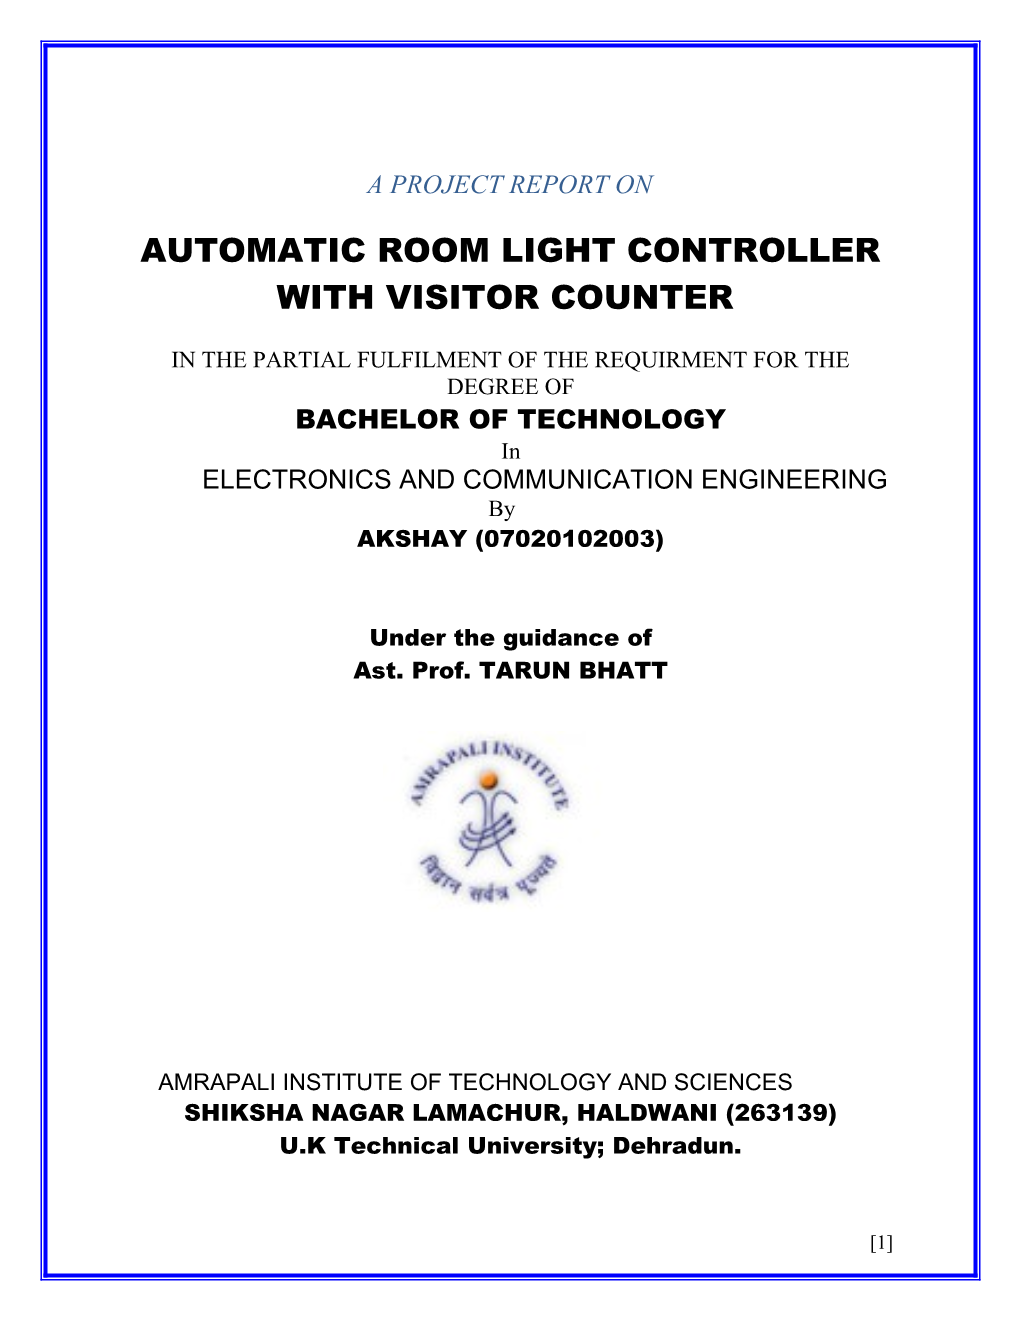 Automatic Room Light Controller with Bidirectional Visitor Counter